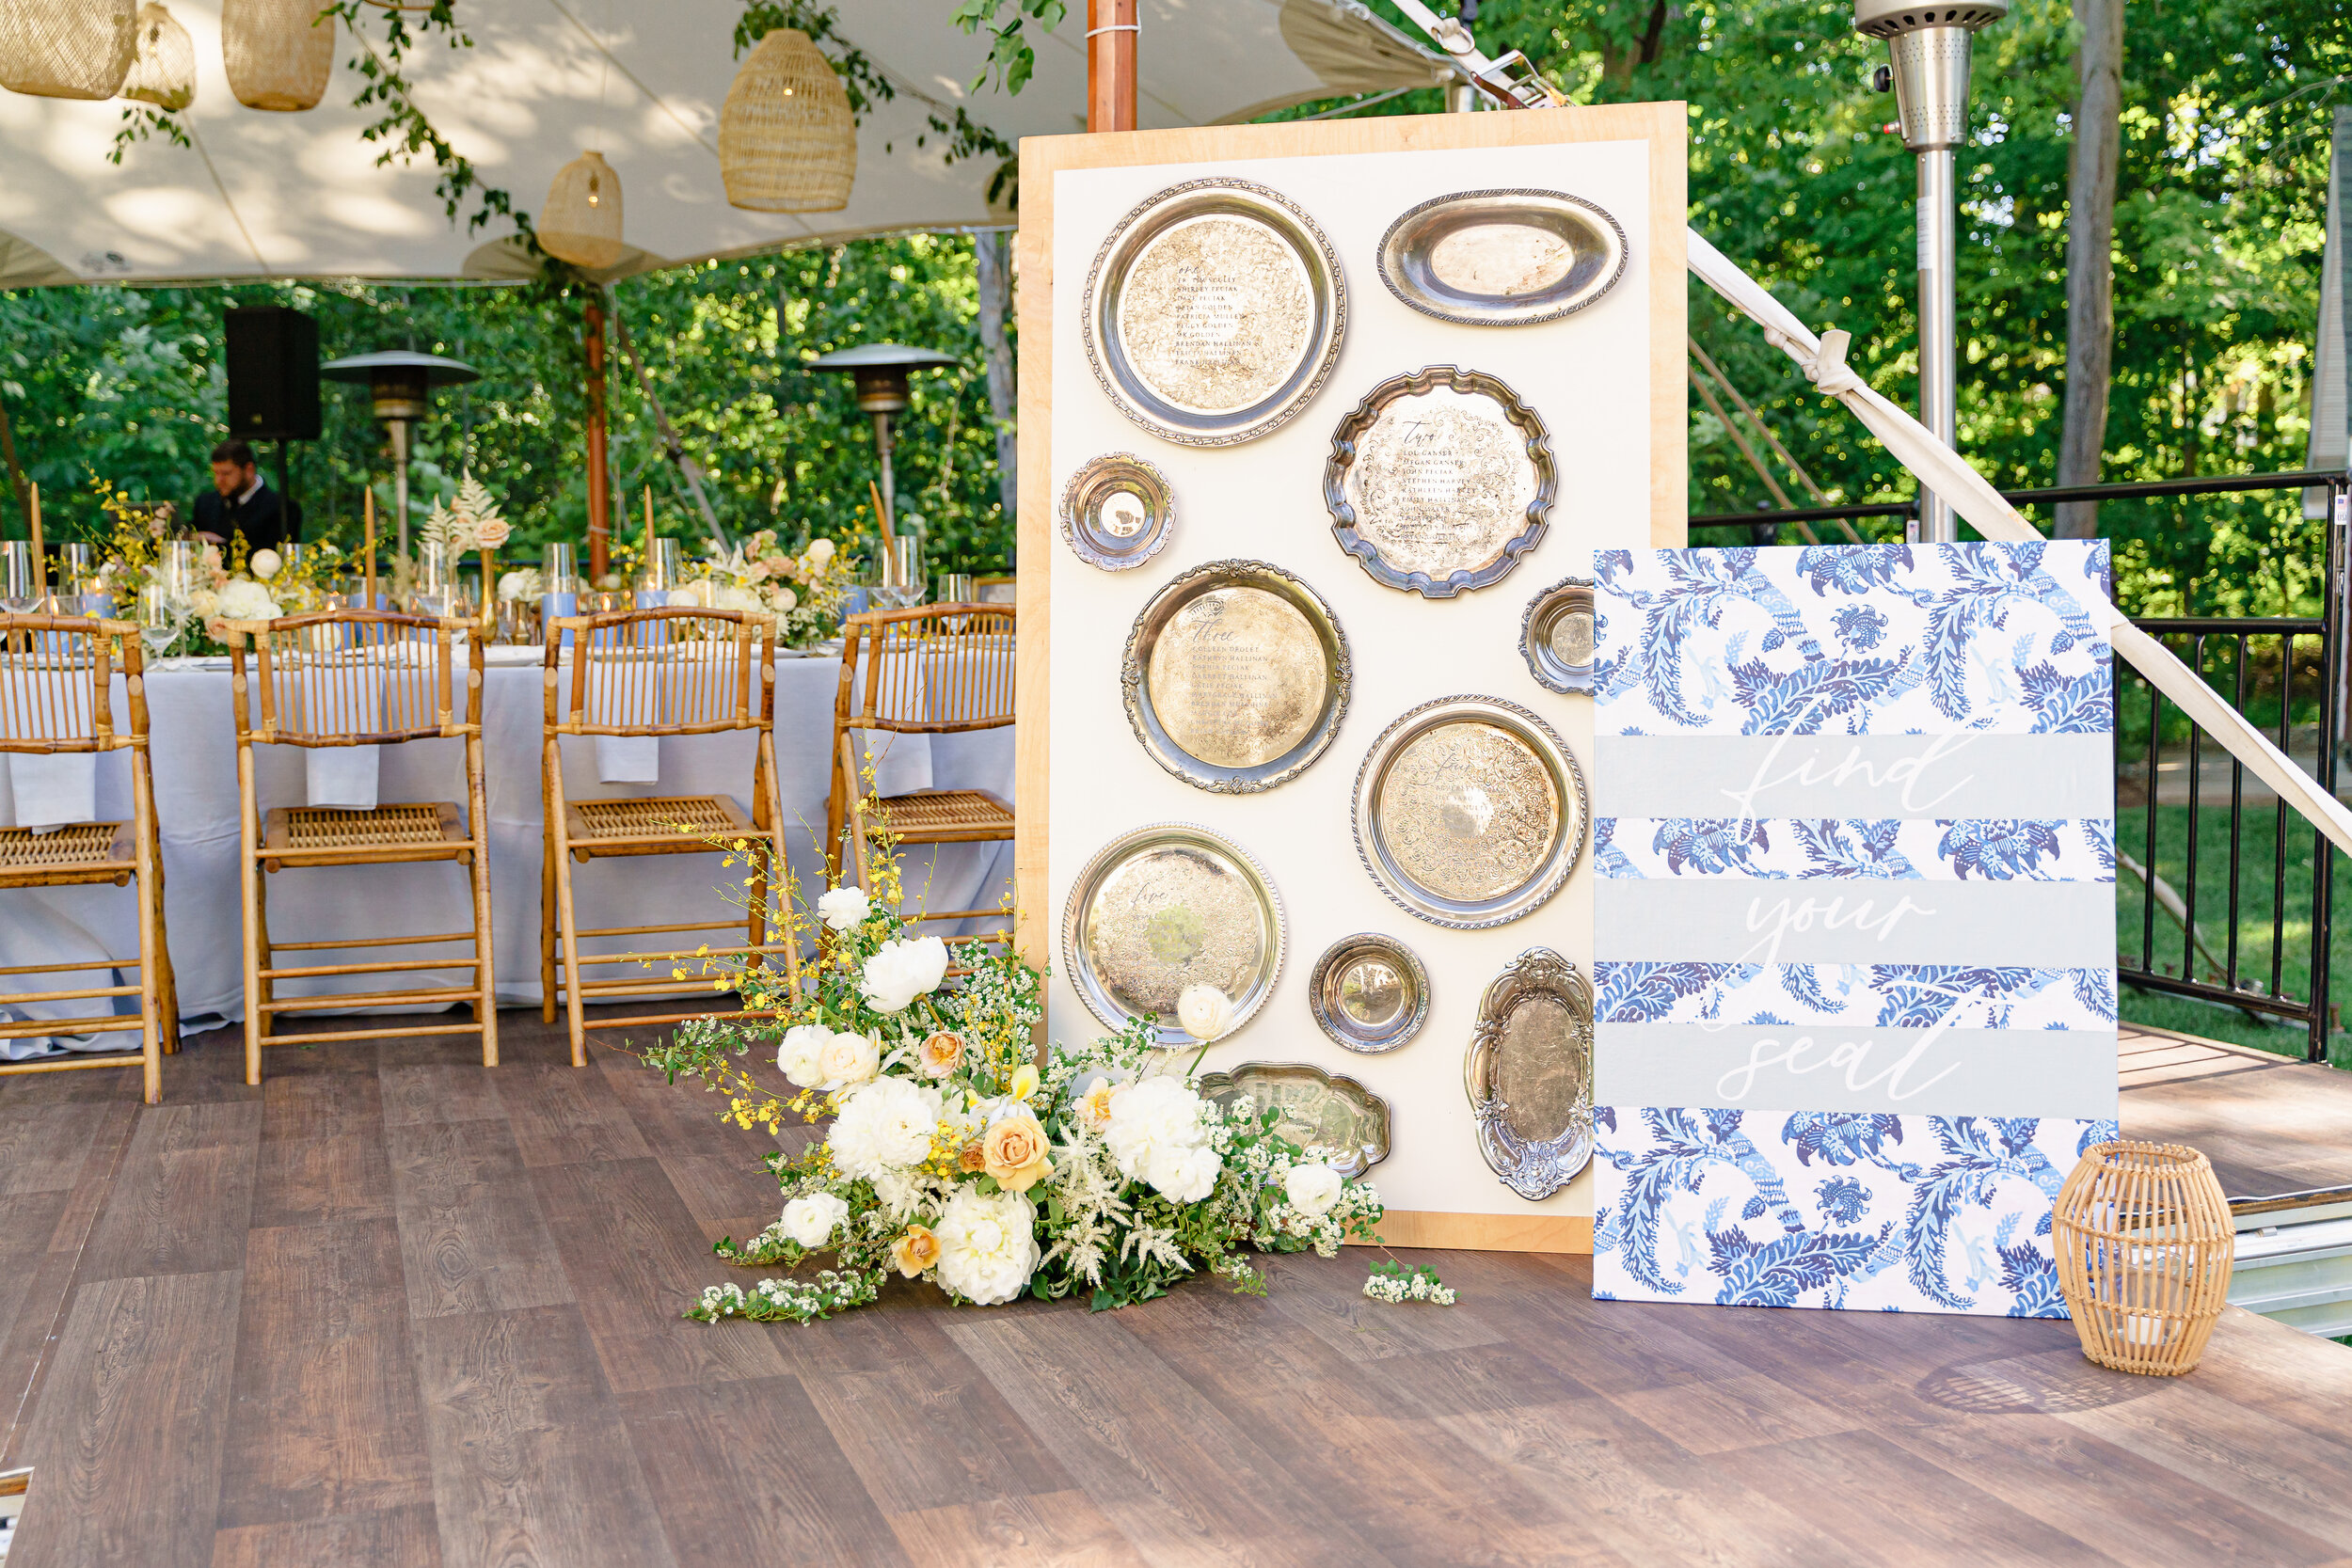 Classic silver tray seating chart for timeless summer wedding